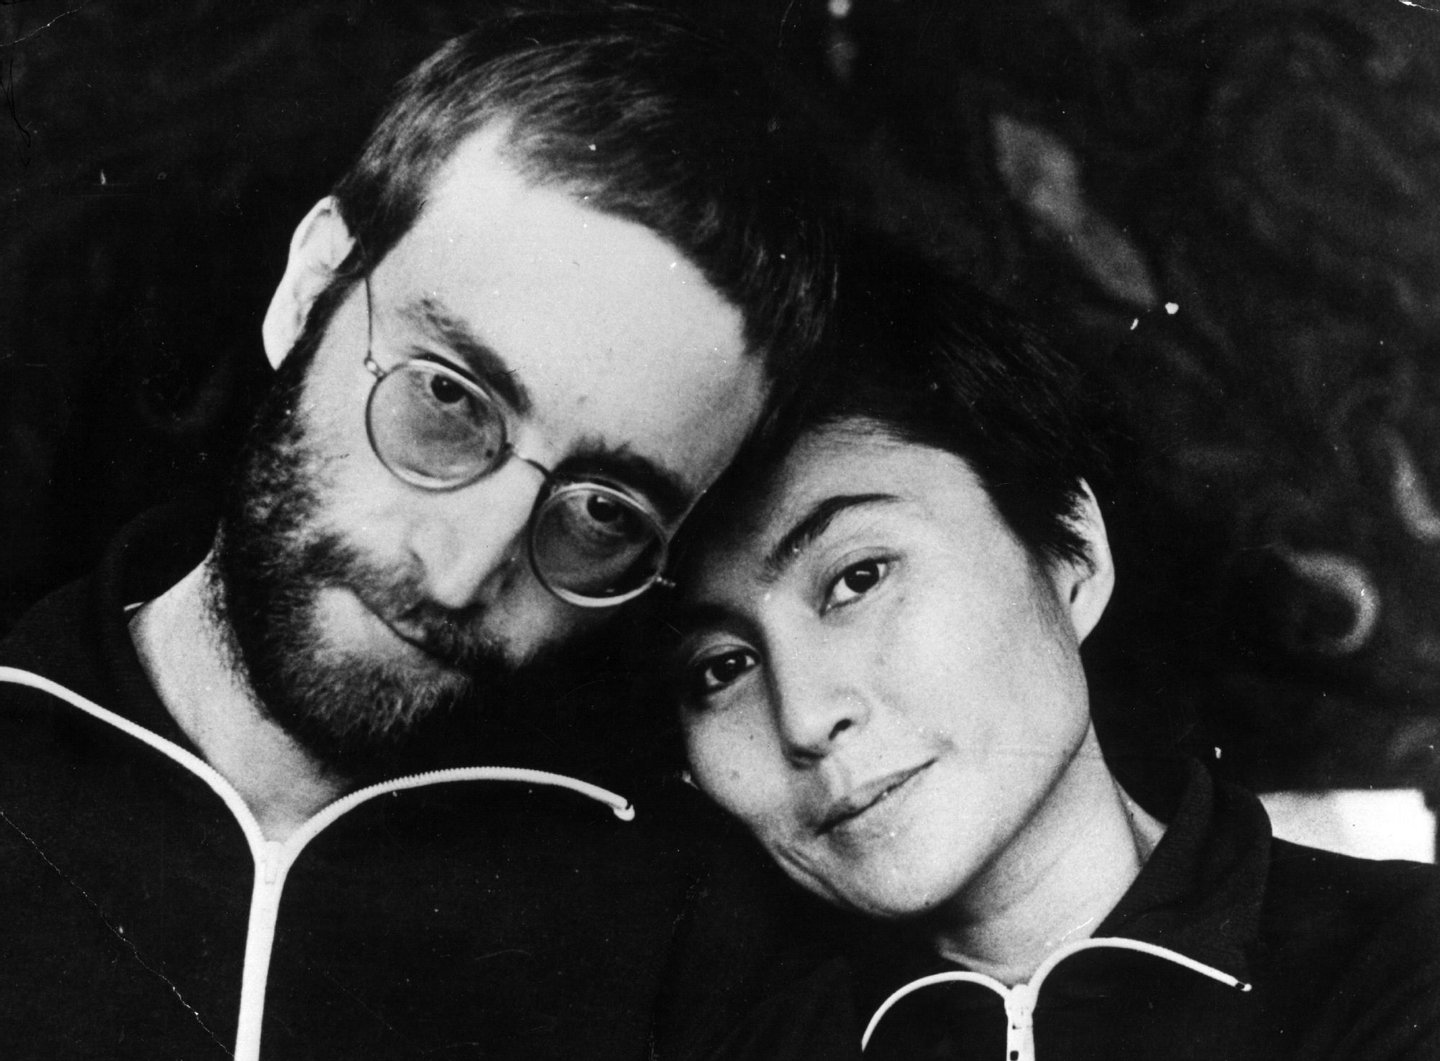 January 1970: John Lennon (1940 - 1980) with his wife Yoko Ono the first time he was photographed with short hair since his hippy days. (Photo by Anthony Cox/Keystone/Getty Images)